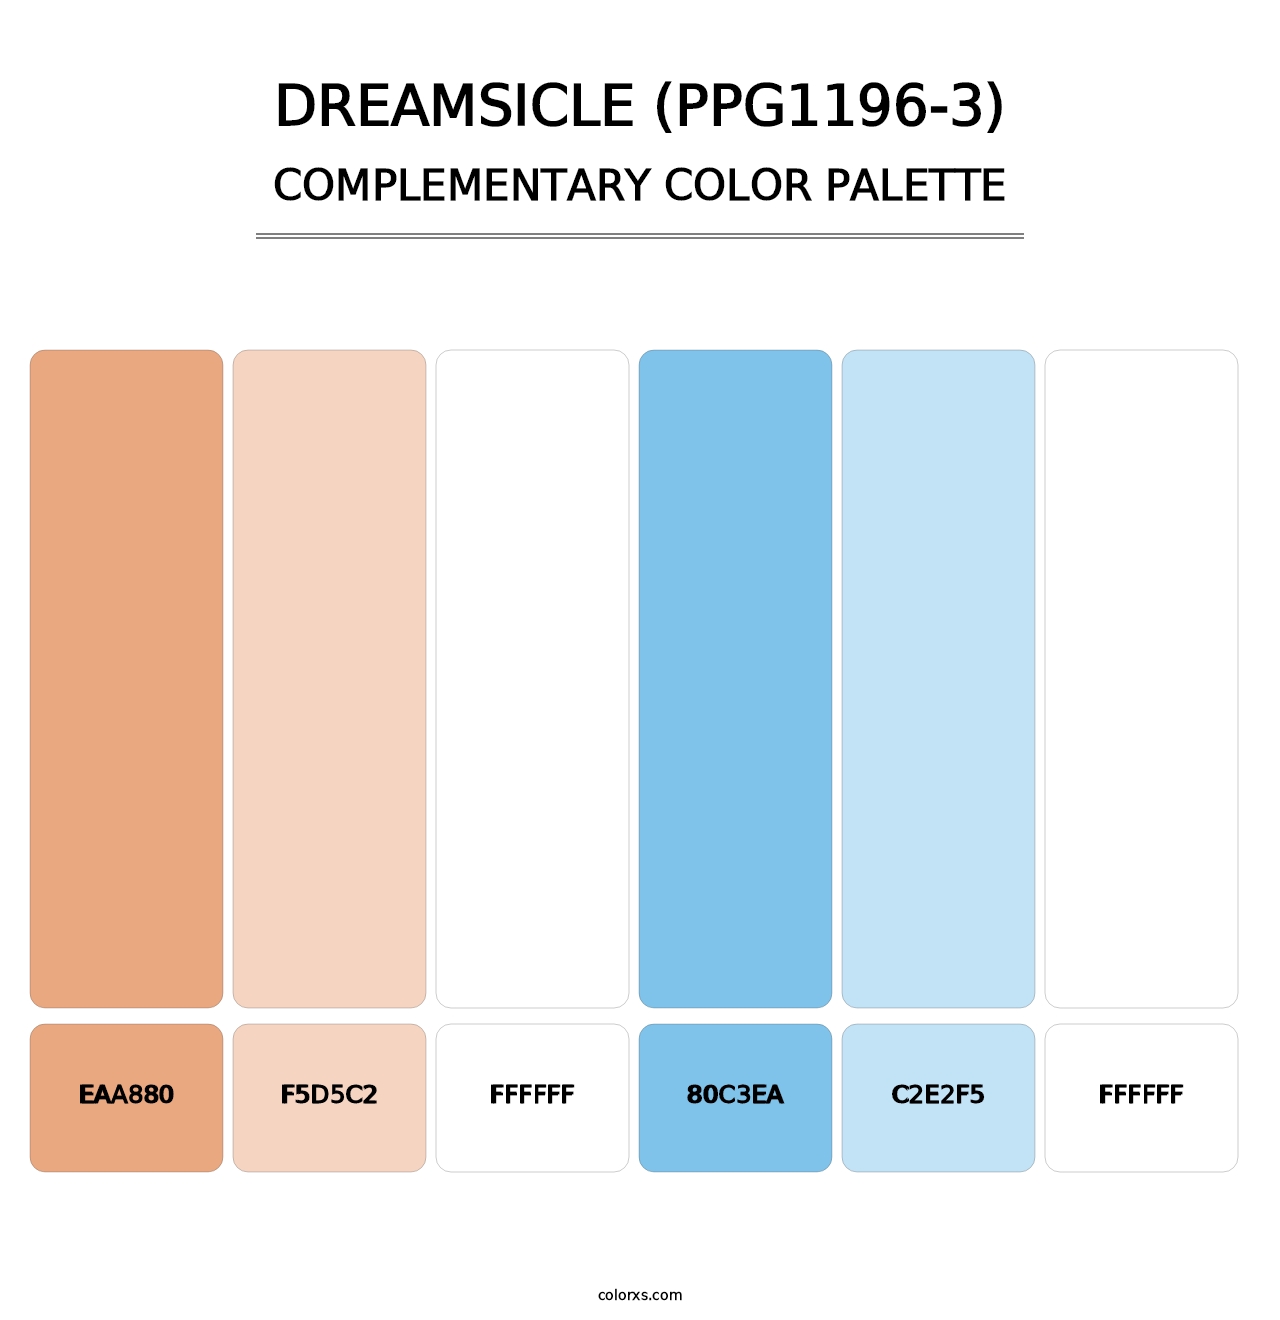 Dreamsicle (PPG1196-3) - Complementary Color Palette